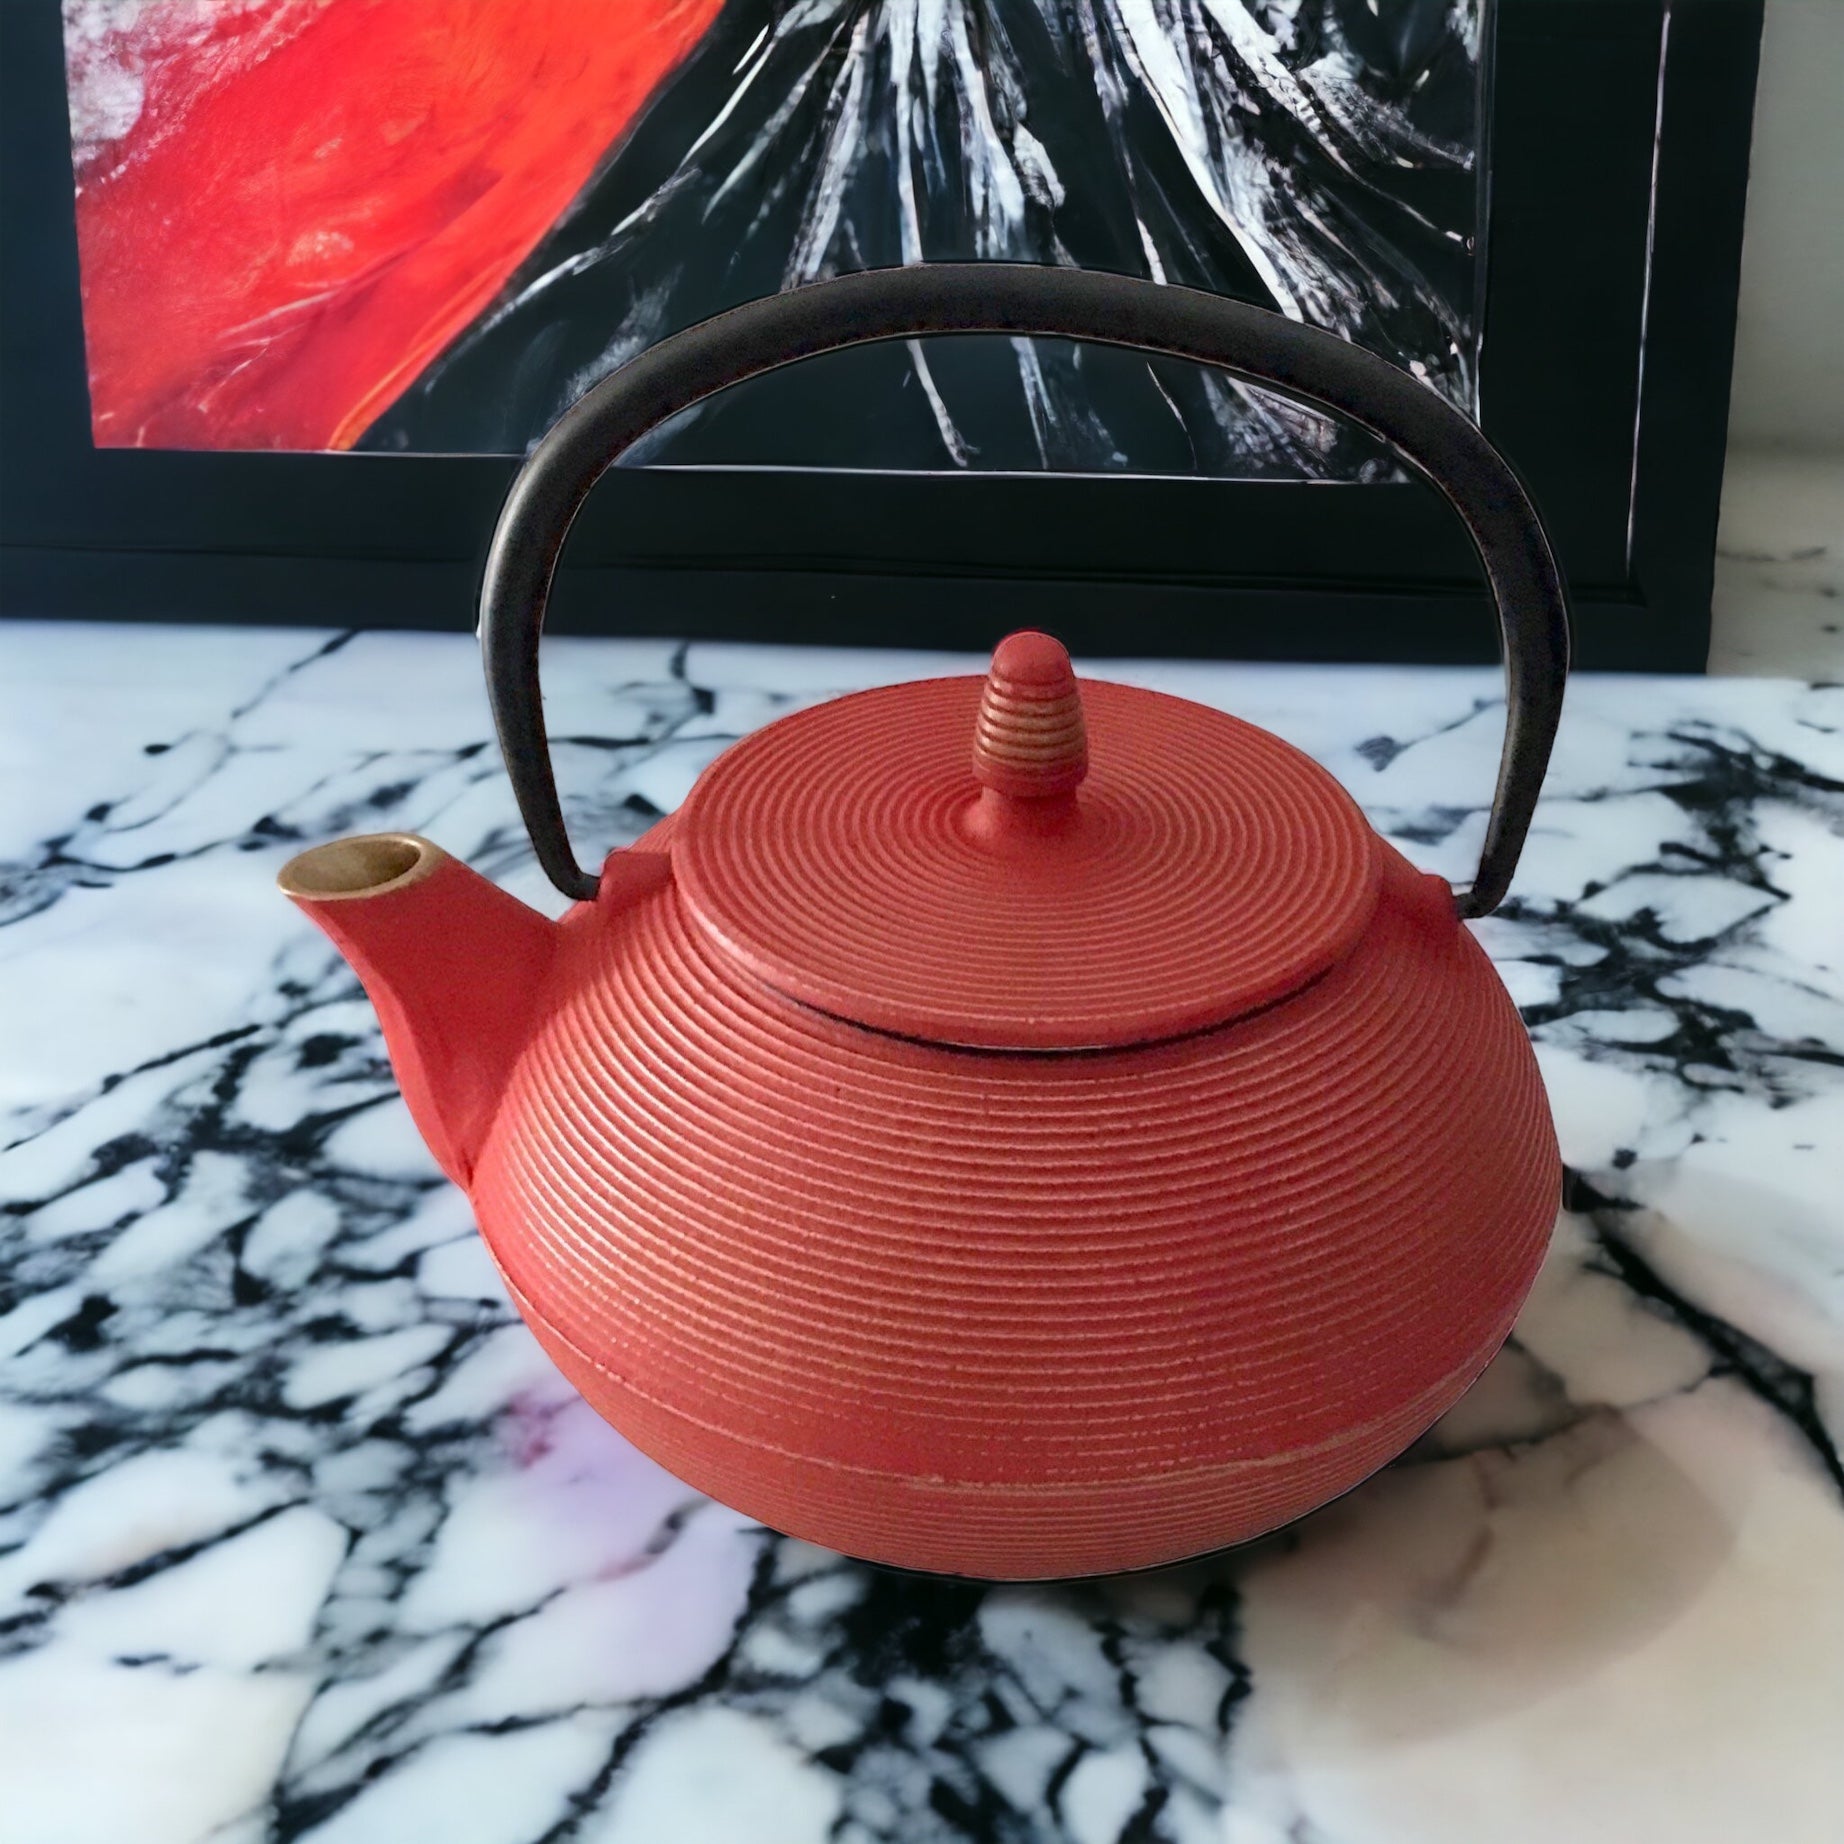 Teapot Cast Iron Red & Gold Wealth 800ml - The Renmy Store Homewares & Gifts 